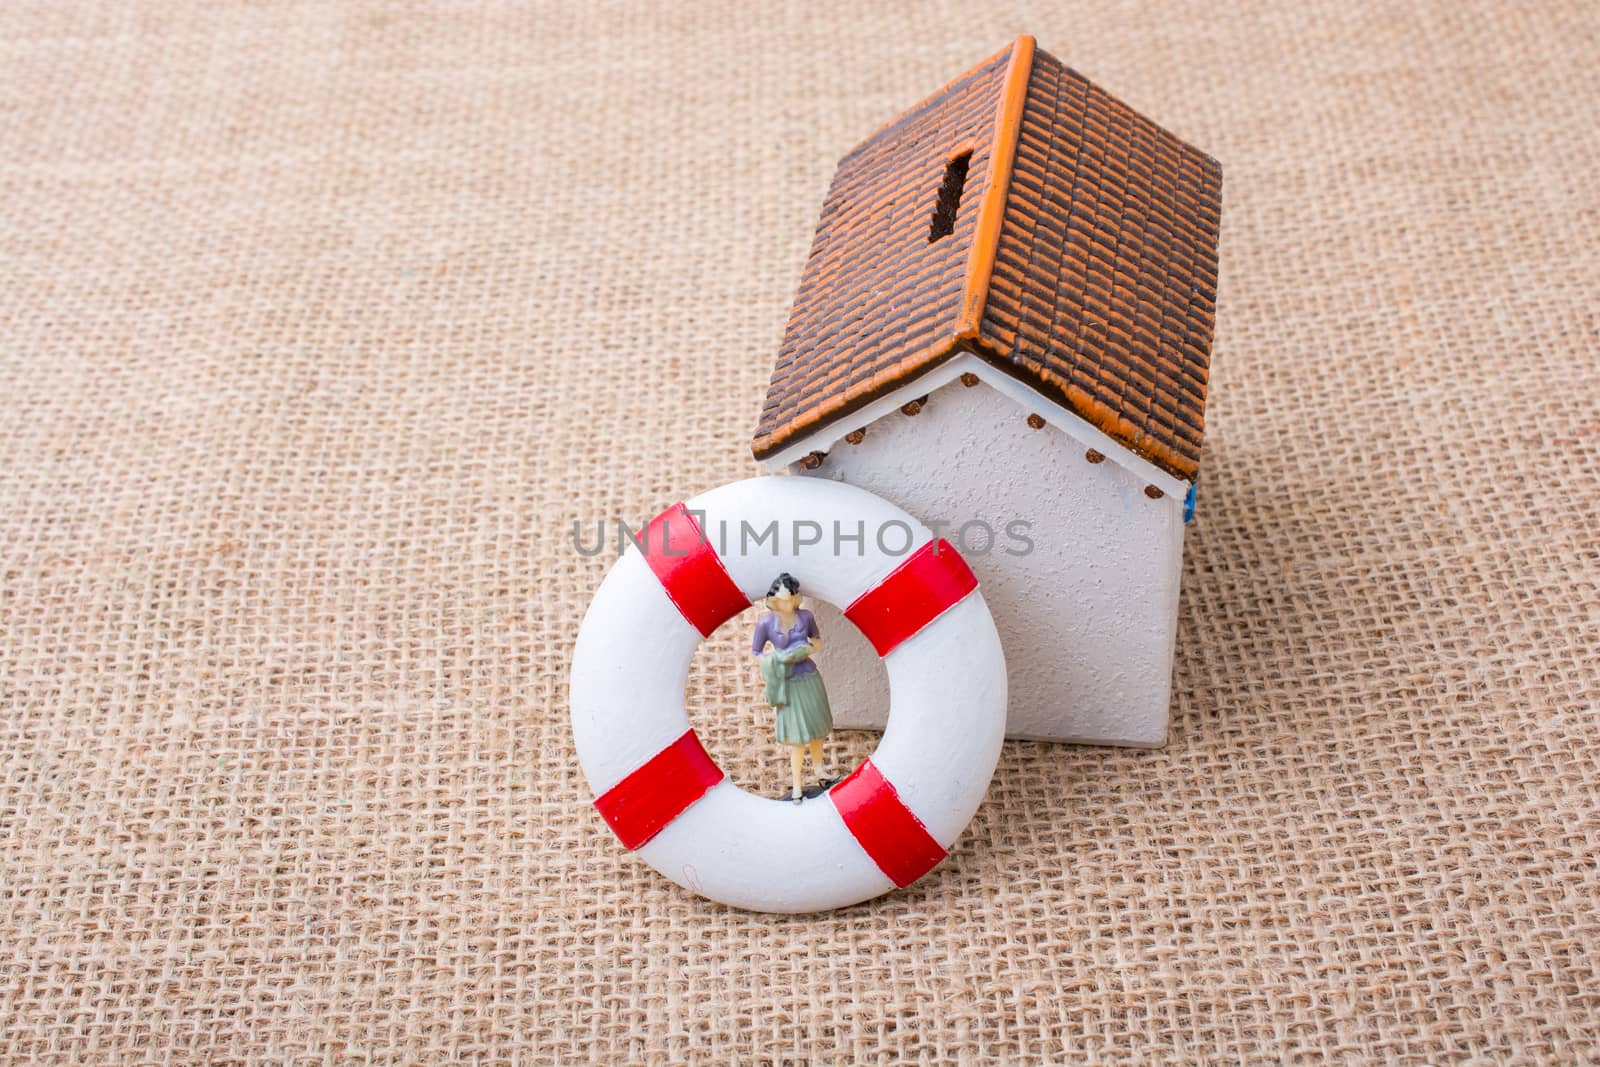 Model house and a life preserver with a woman figure by berkay